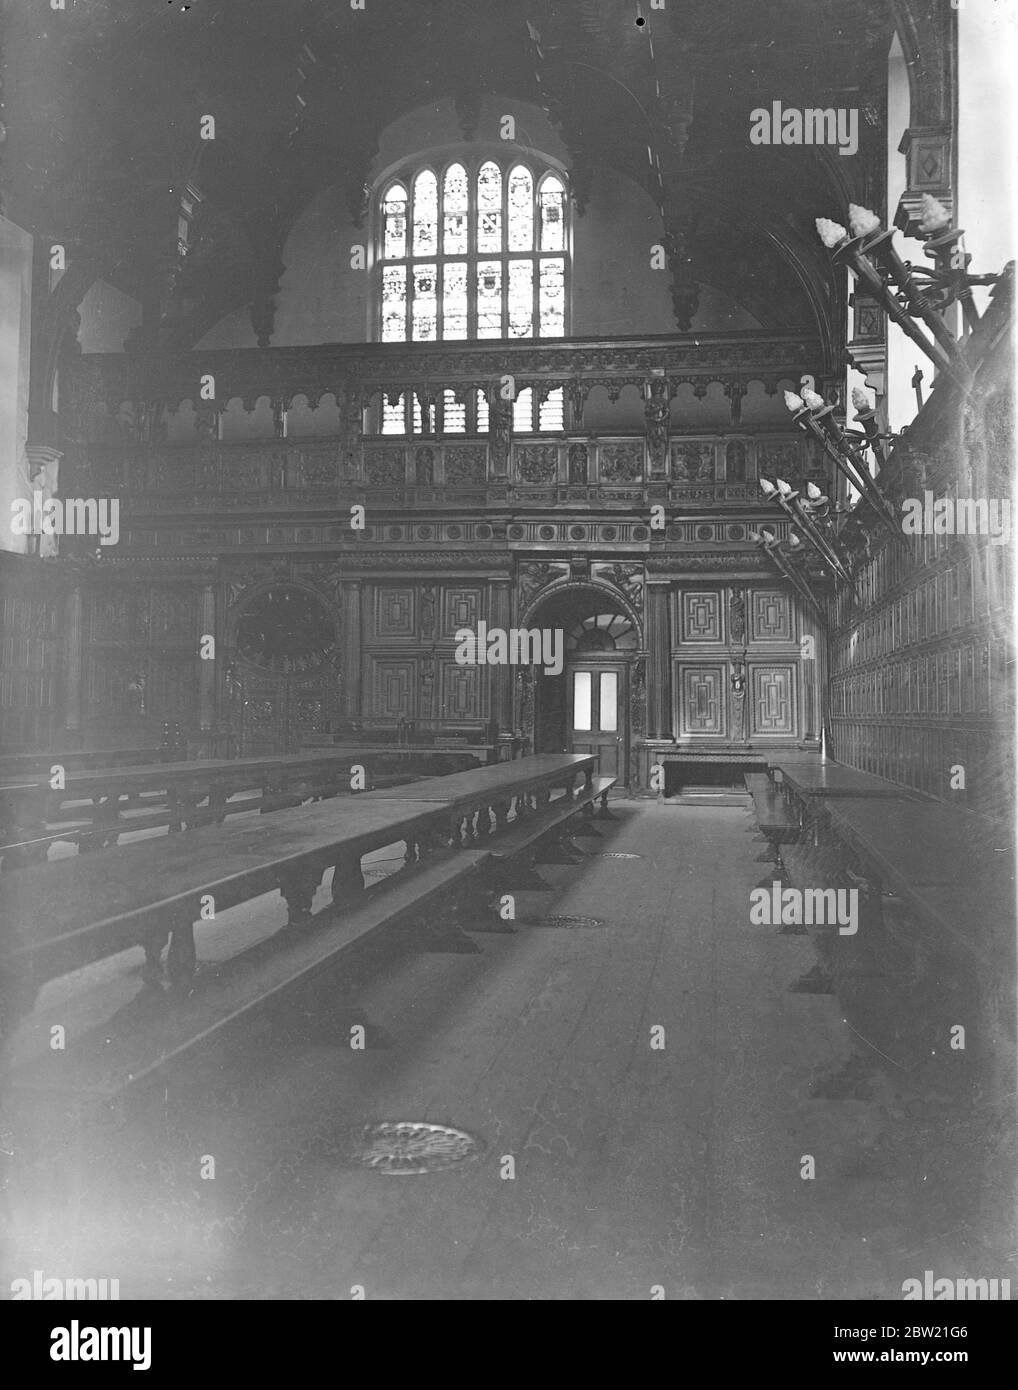 The Middle Temple Hall in London where G.B. Harrison [George Bagshawe Harrison] was recording for Columbia Broadcasting System CBS. August 1937 [?] Stock Photo